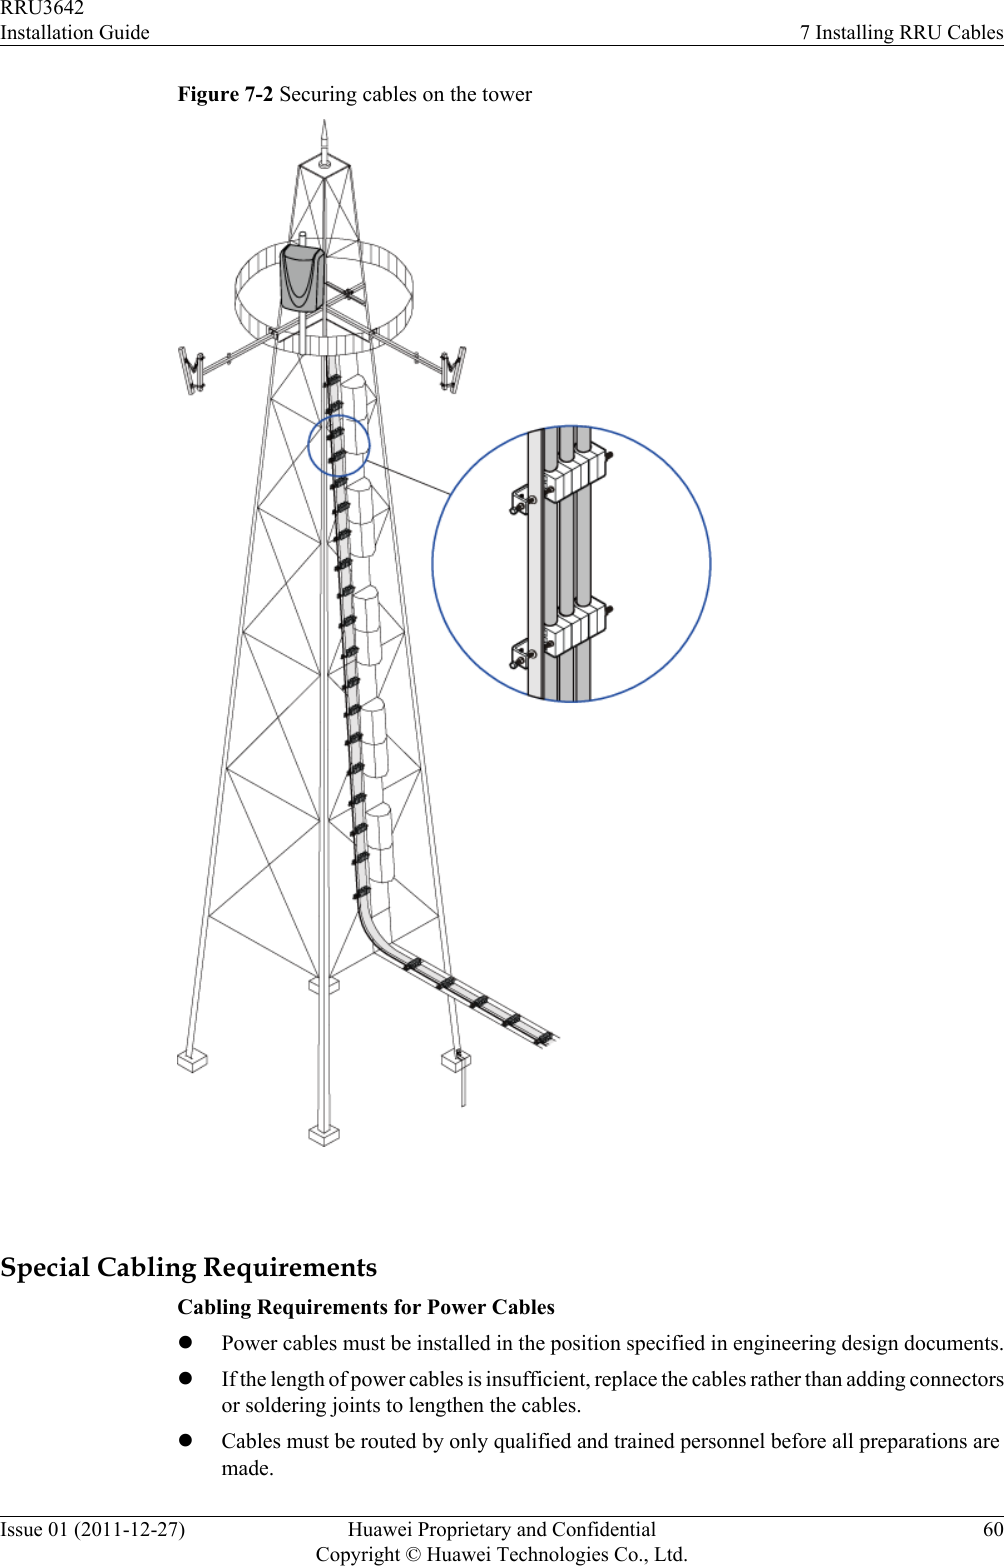 Figure 7-2 Securing cables on the tower Special Cabling RequirementsCabling Requirements for Power CableslPower cables must be installed in the position specified in engineering design documents.lIf the length of power cables is insufficient, replace the cables rather than adding connectorsor soldering joints to lengthen the cables.lCables must be routed by only qualified and trained personnel before all preparations aremade.RRU3642Installation Guide 7 Installing RRU CablesIssue 01 (2011-12-27) Huawei Proprietary and ConfidentialCopyright © Huawei Technologies Co., Ltd.60